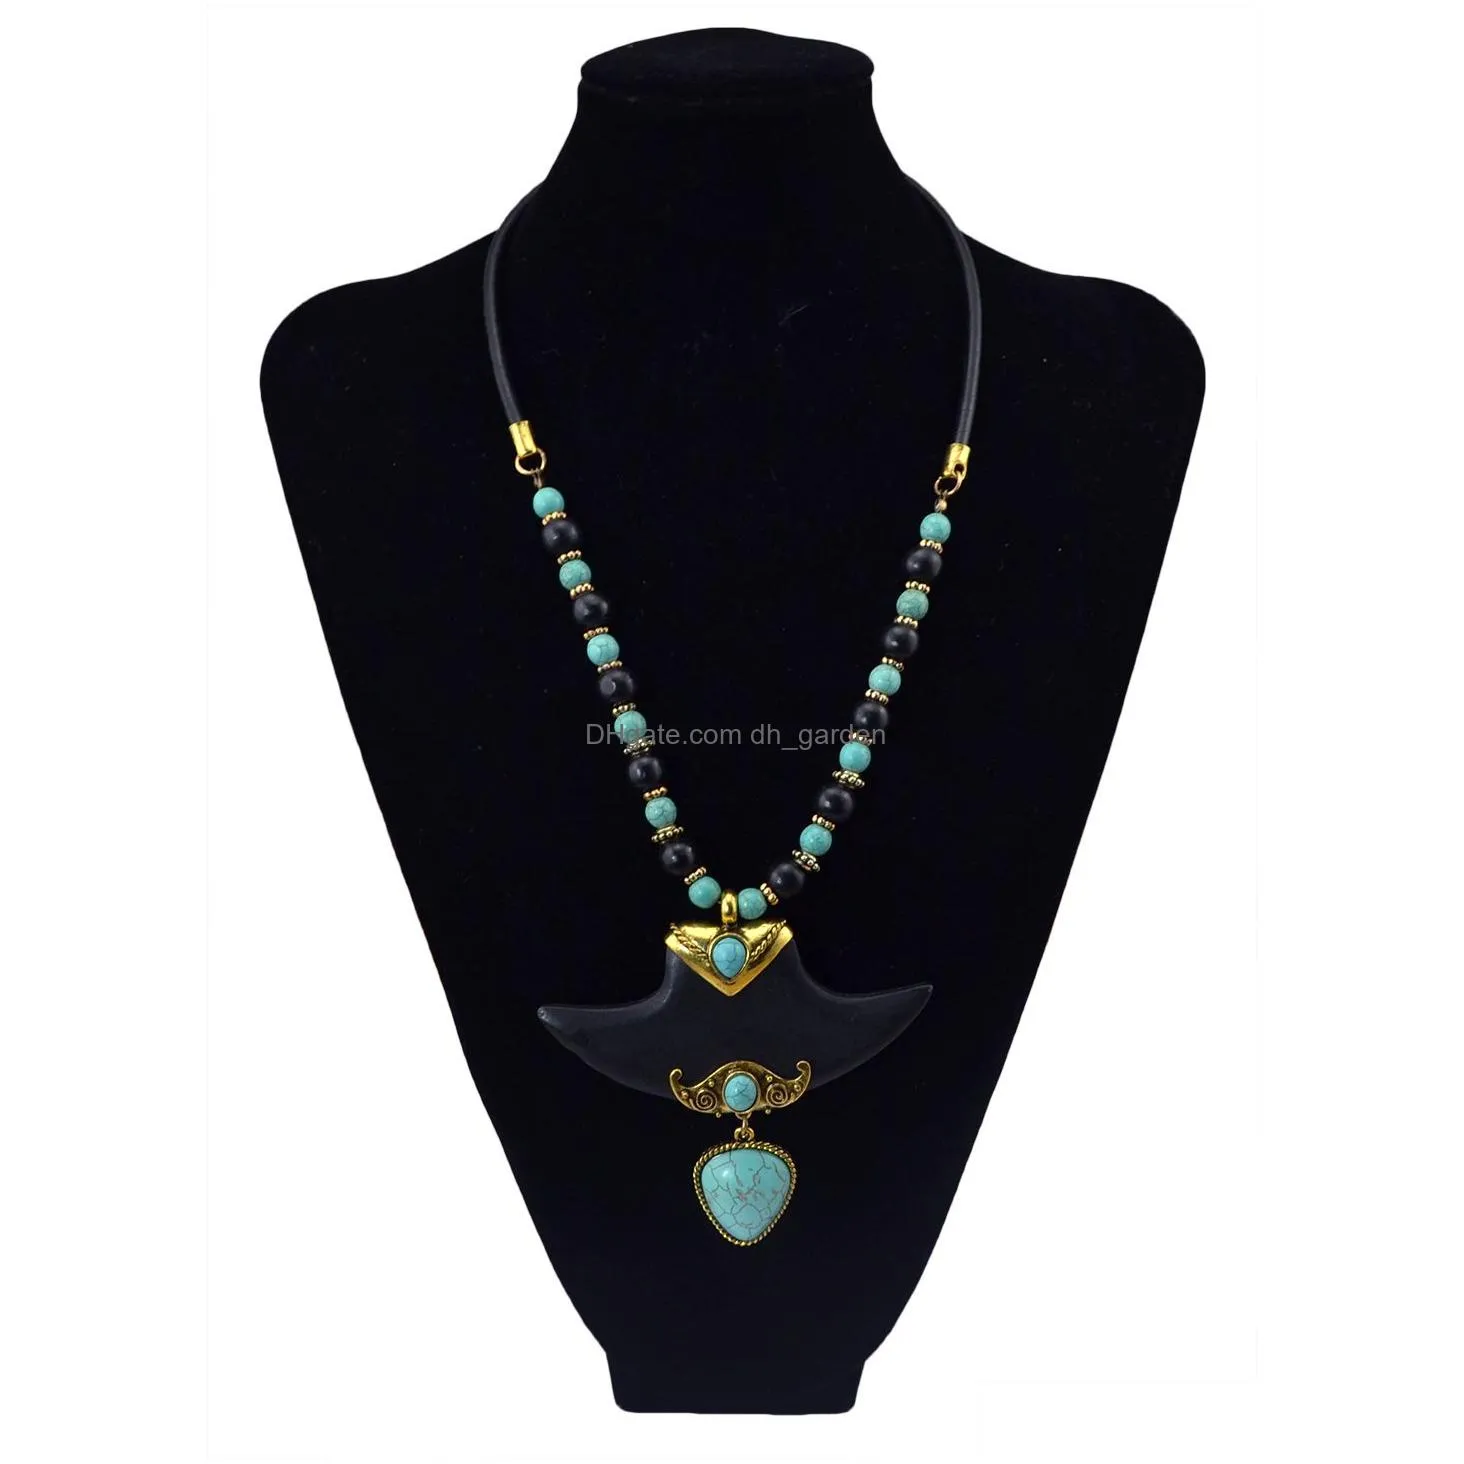 Bohemian Vintage Silver Gold Plated Leather Chain Turquoise Collar Choker Necklace for Women